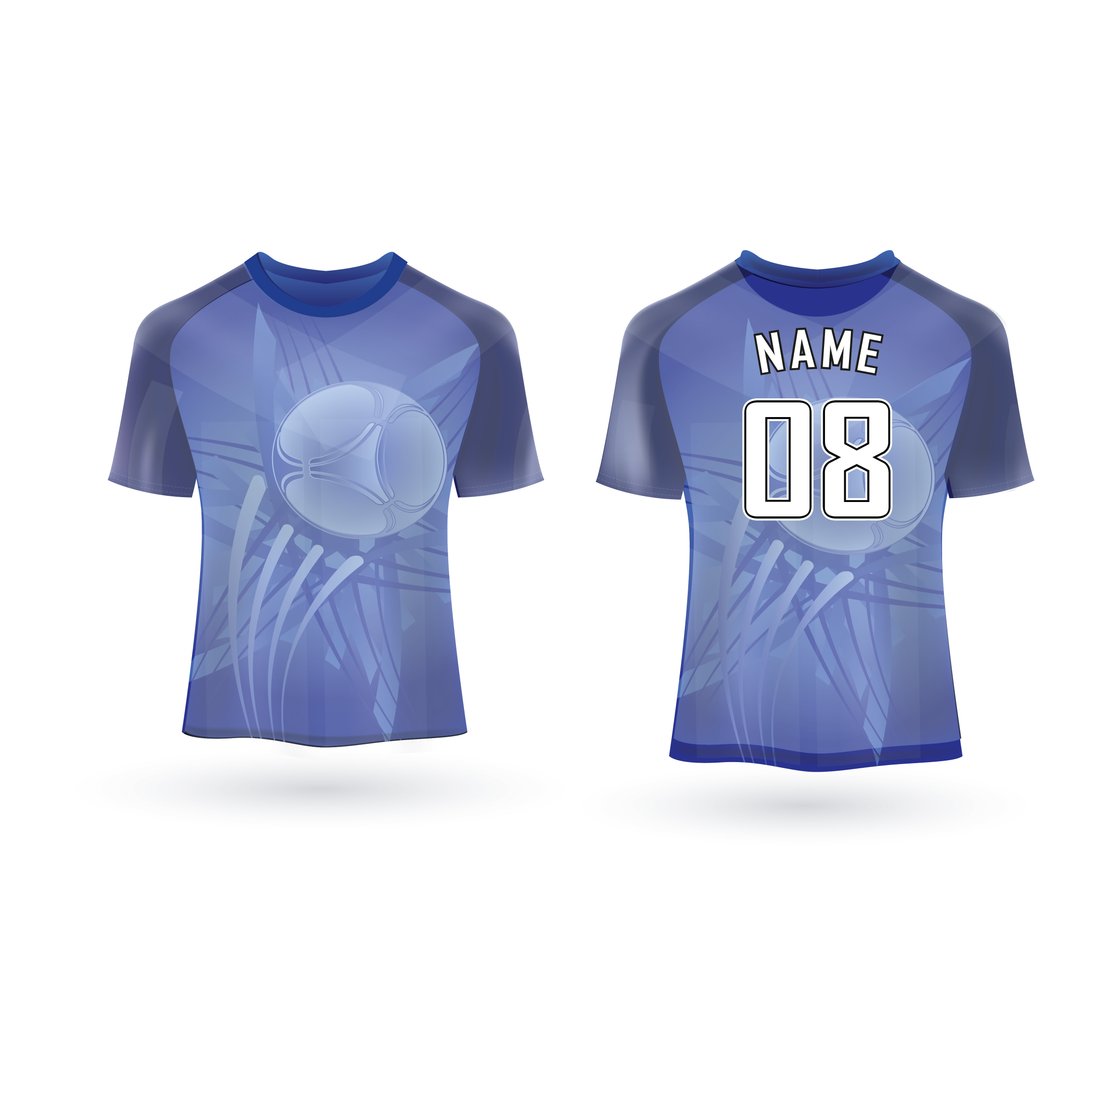 NEXT PRINT All Over Printed Customized Sublimation T-Shirt Unisex Sports Jersey Player Name & Number, Team Name NP50000277